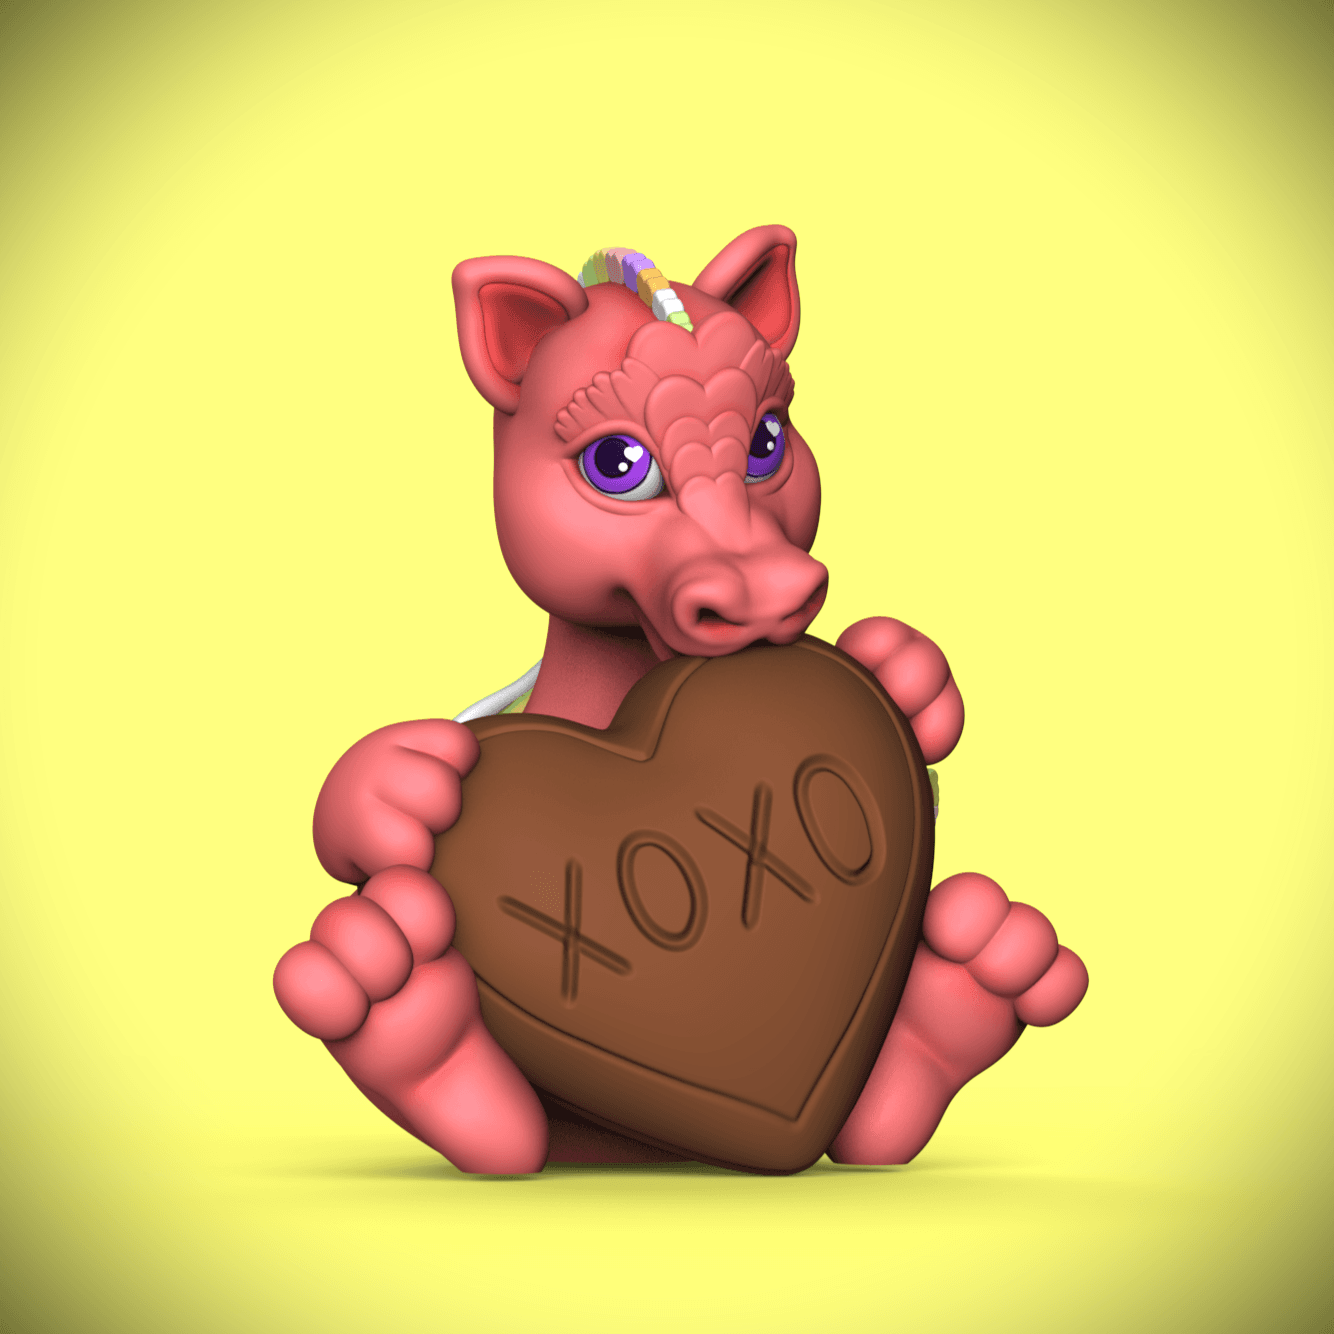 Candy -The Baby Dragon 3d model